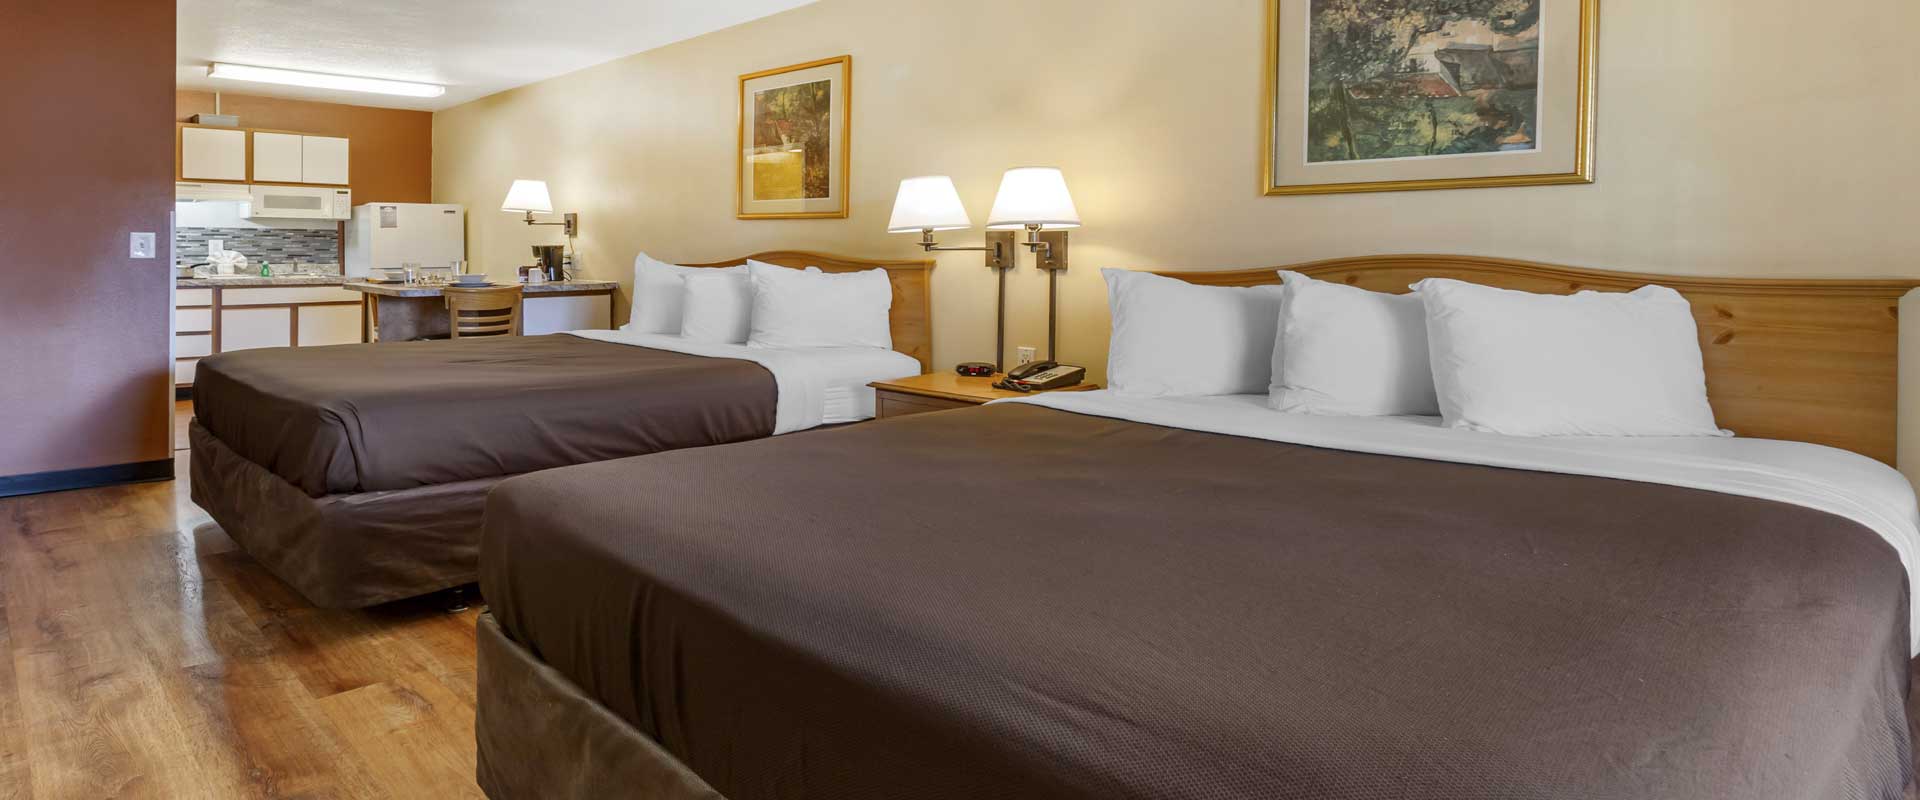 Suburban Extended Stay | Albuquerque Newly Remodeled Hotels Motels in